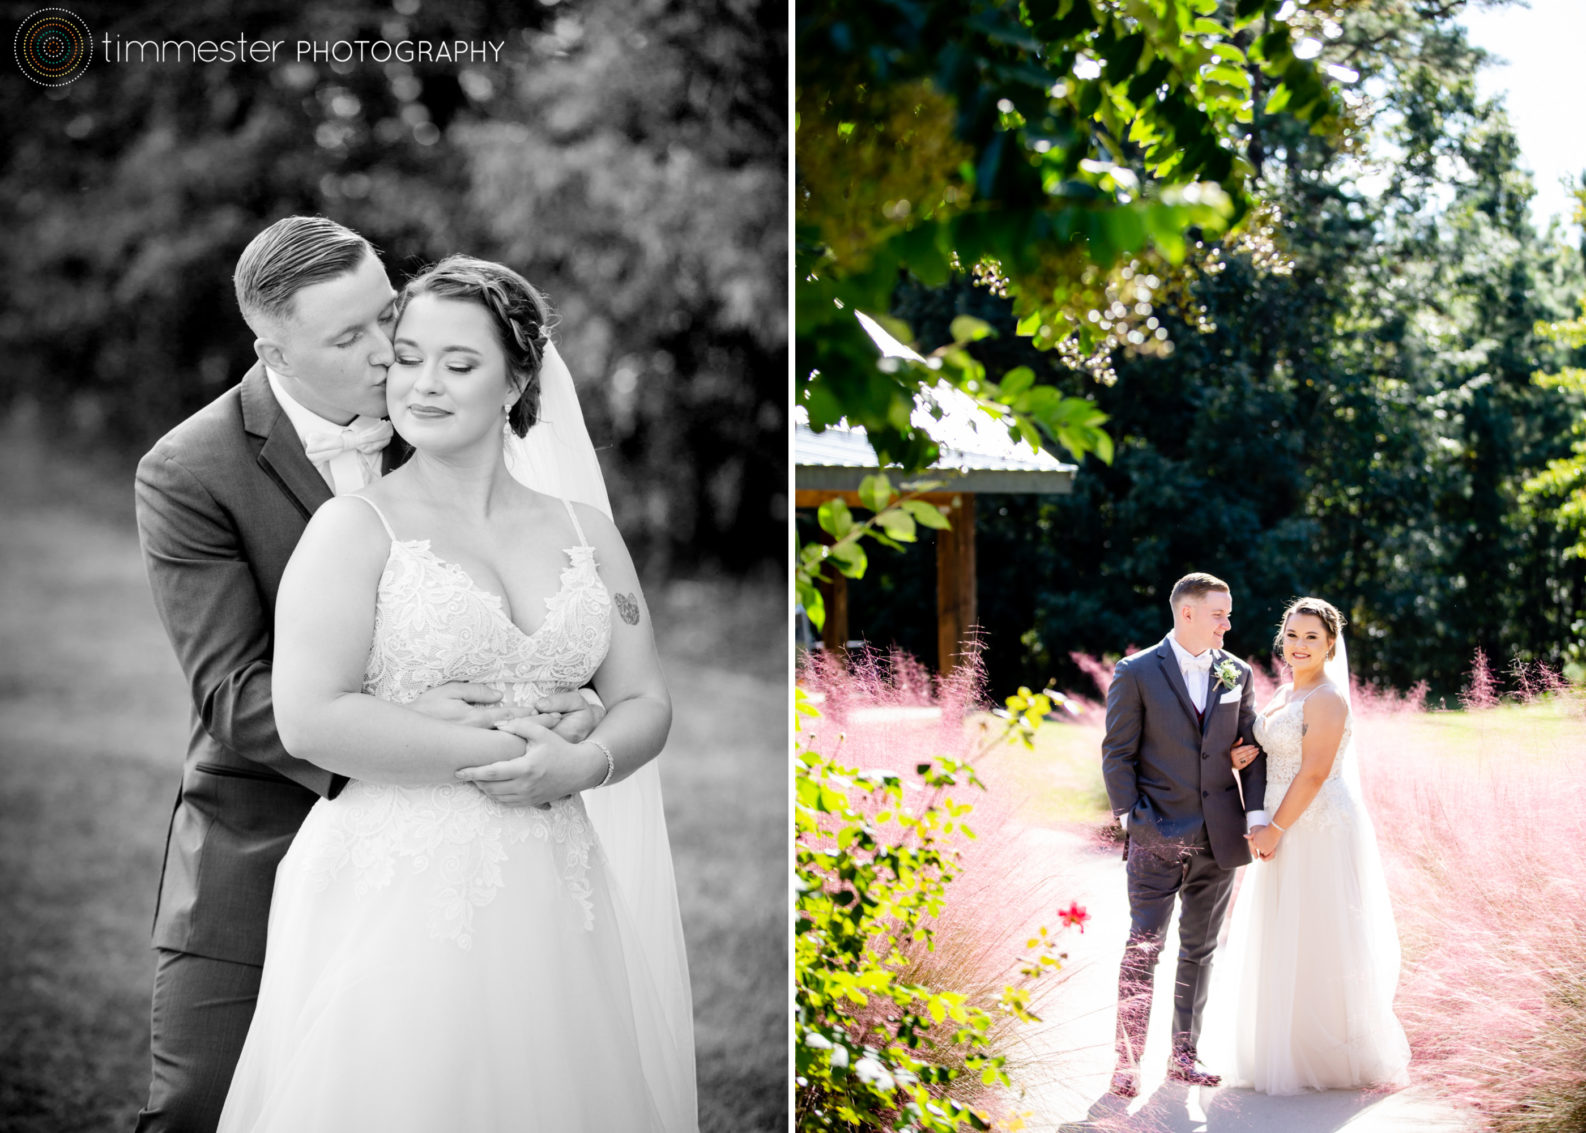 Wedding day ceremony and portraits at Sugarneck in Sanford, NC